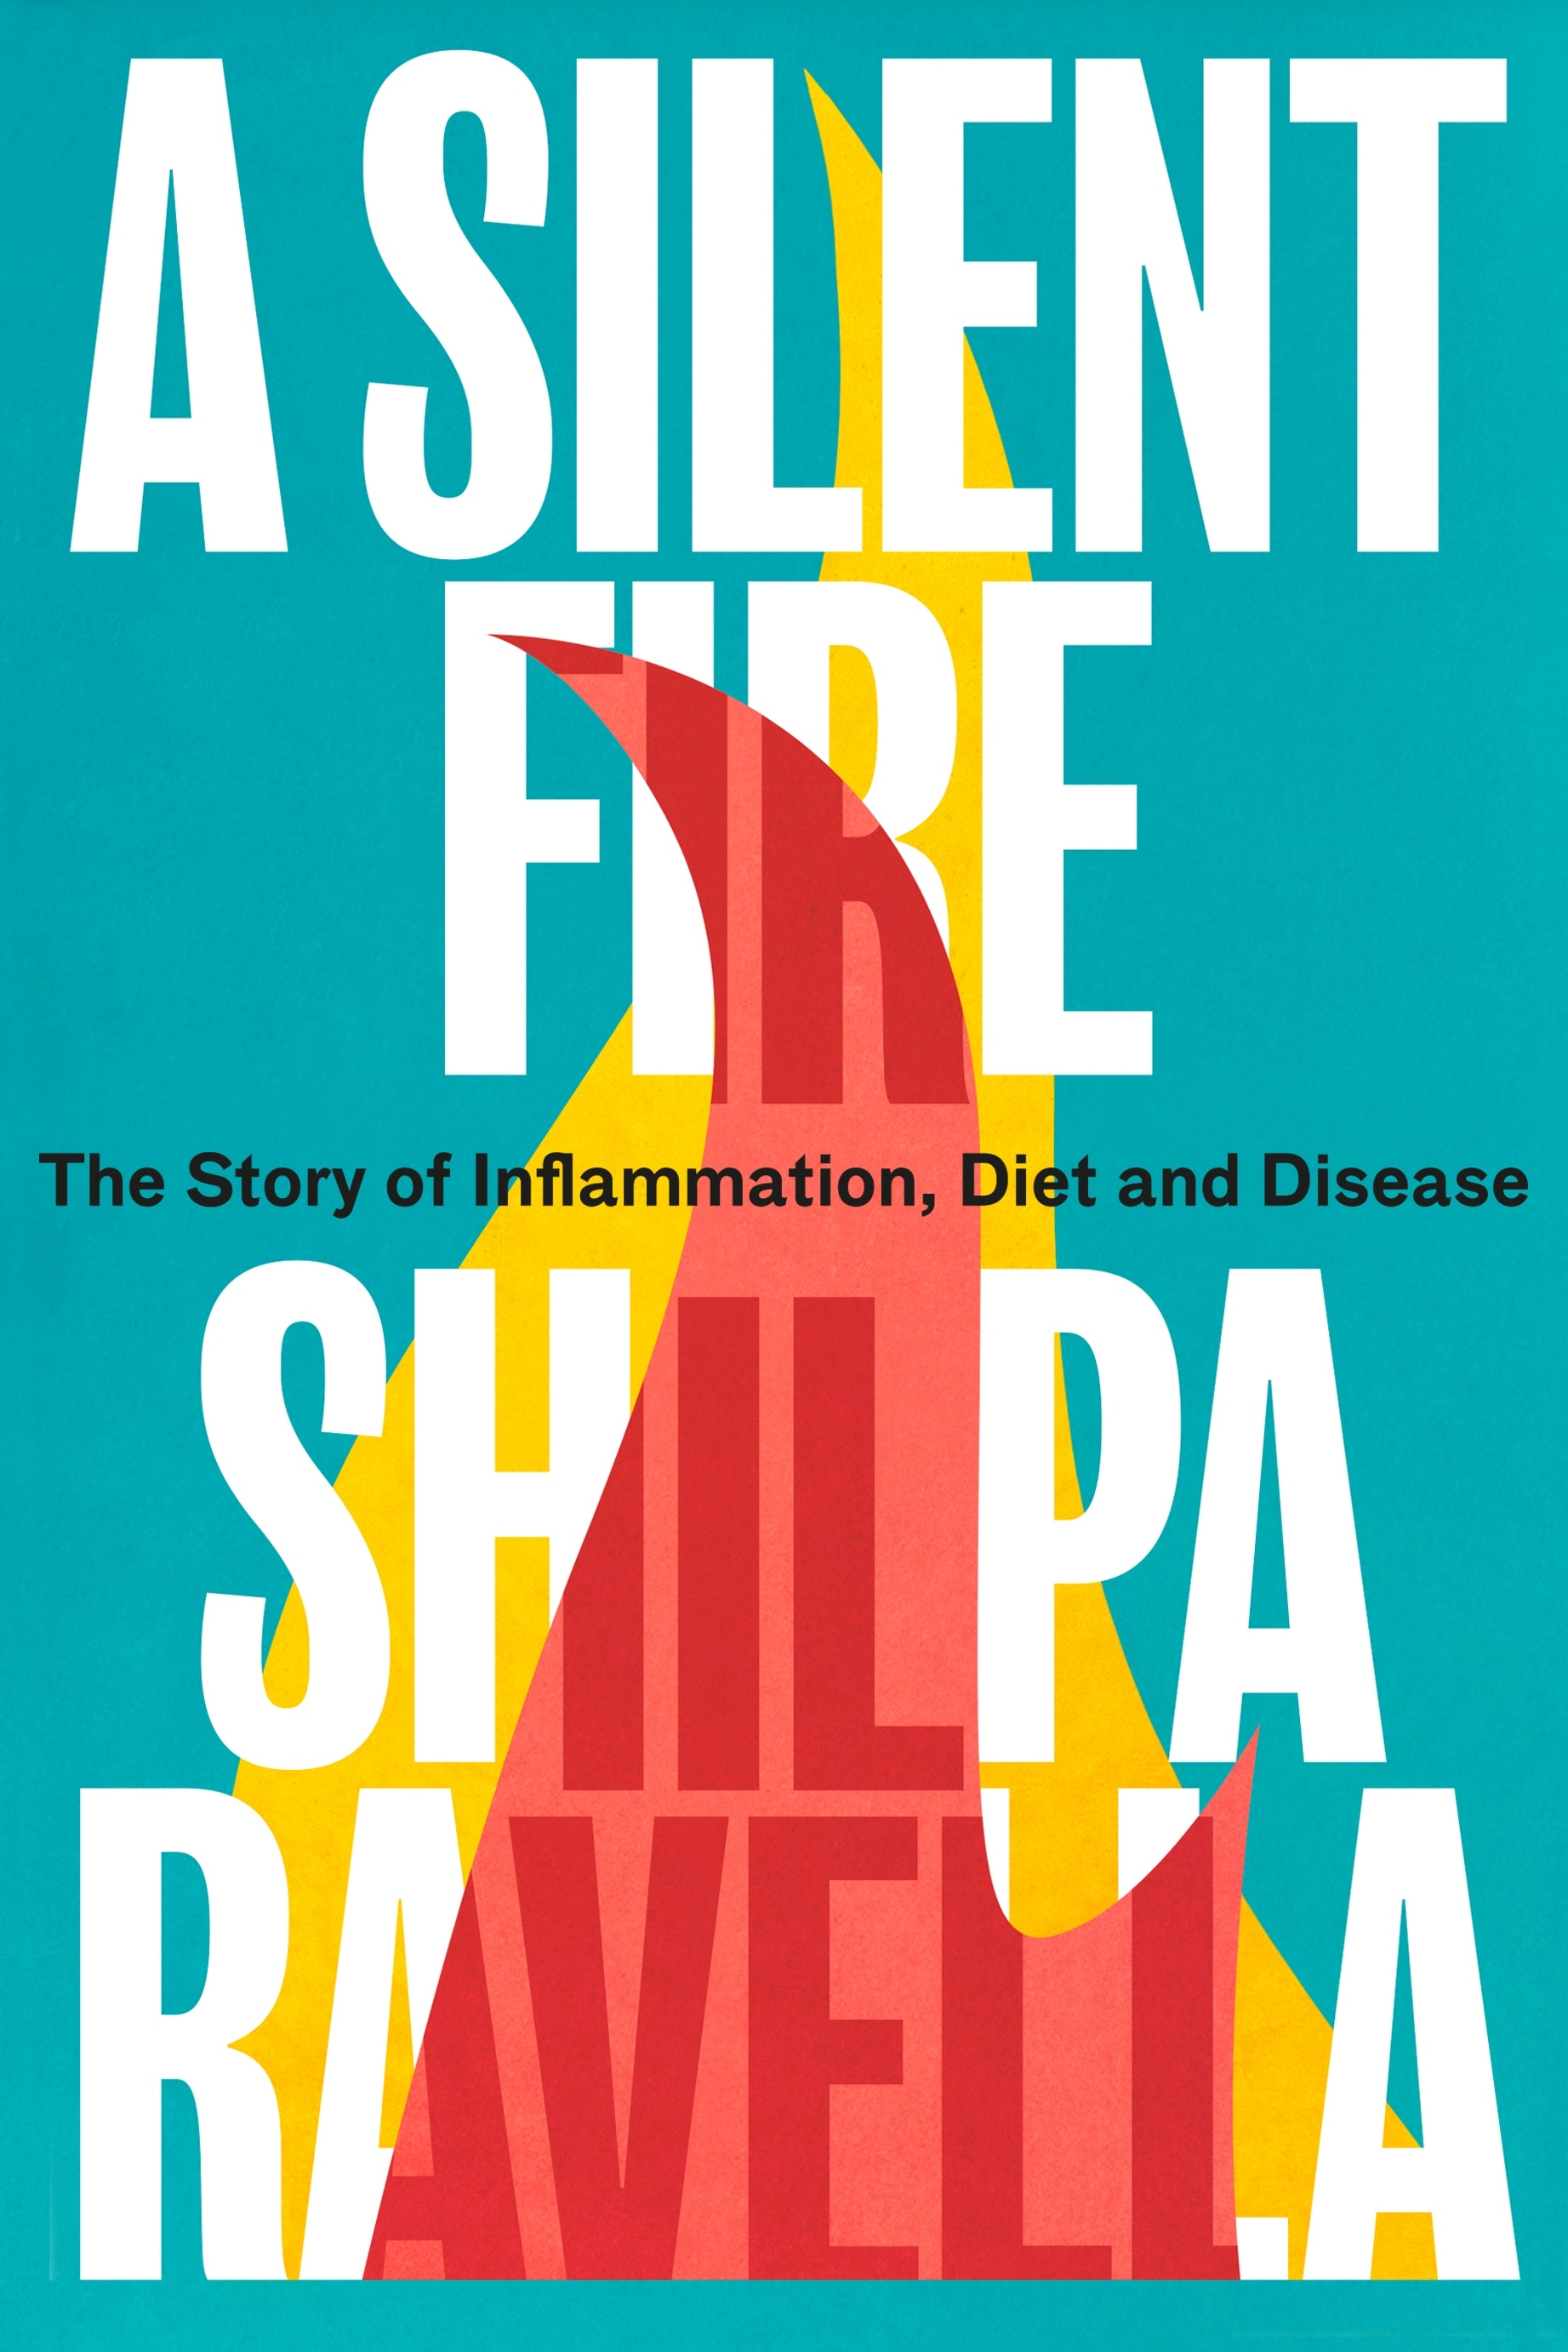 Book “A Silent Fire” by Shilpa Ravella — January 12, 2023